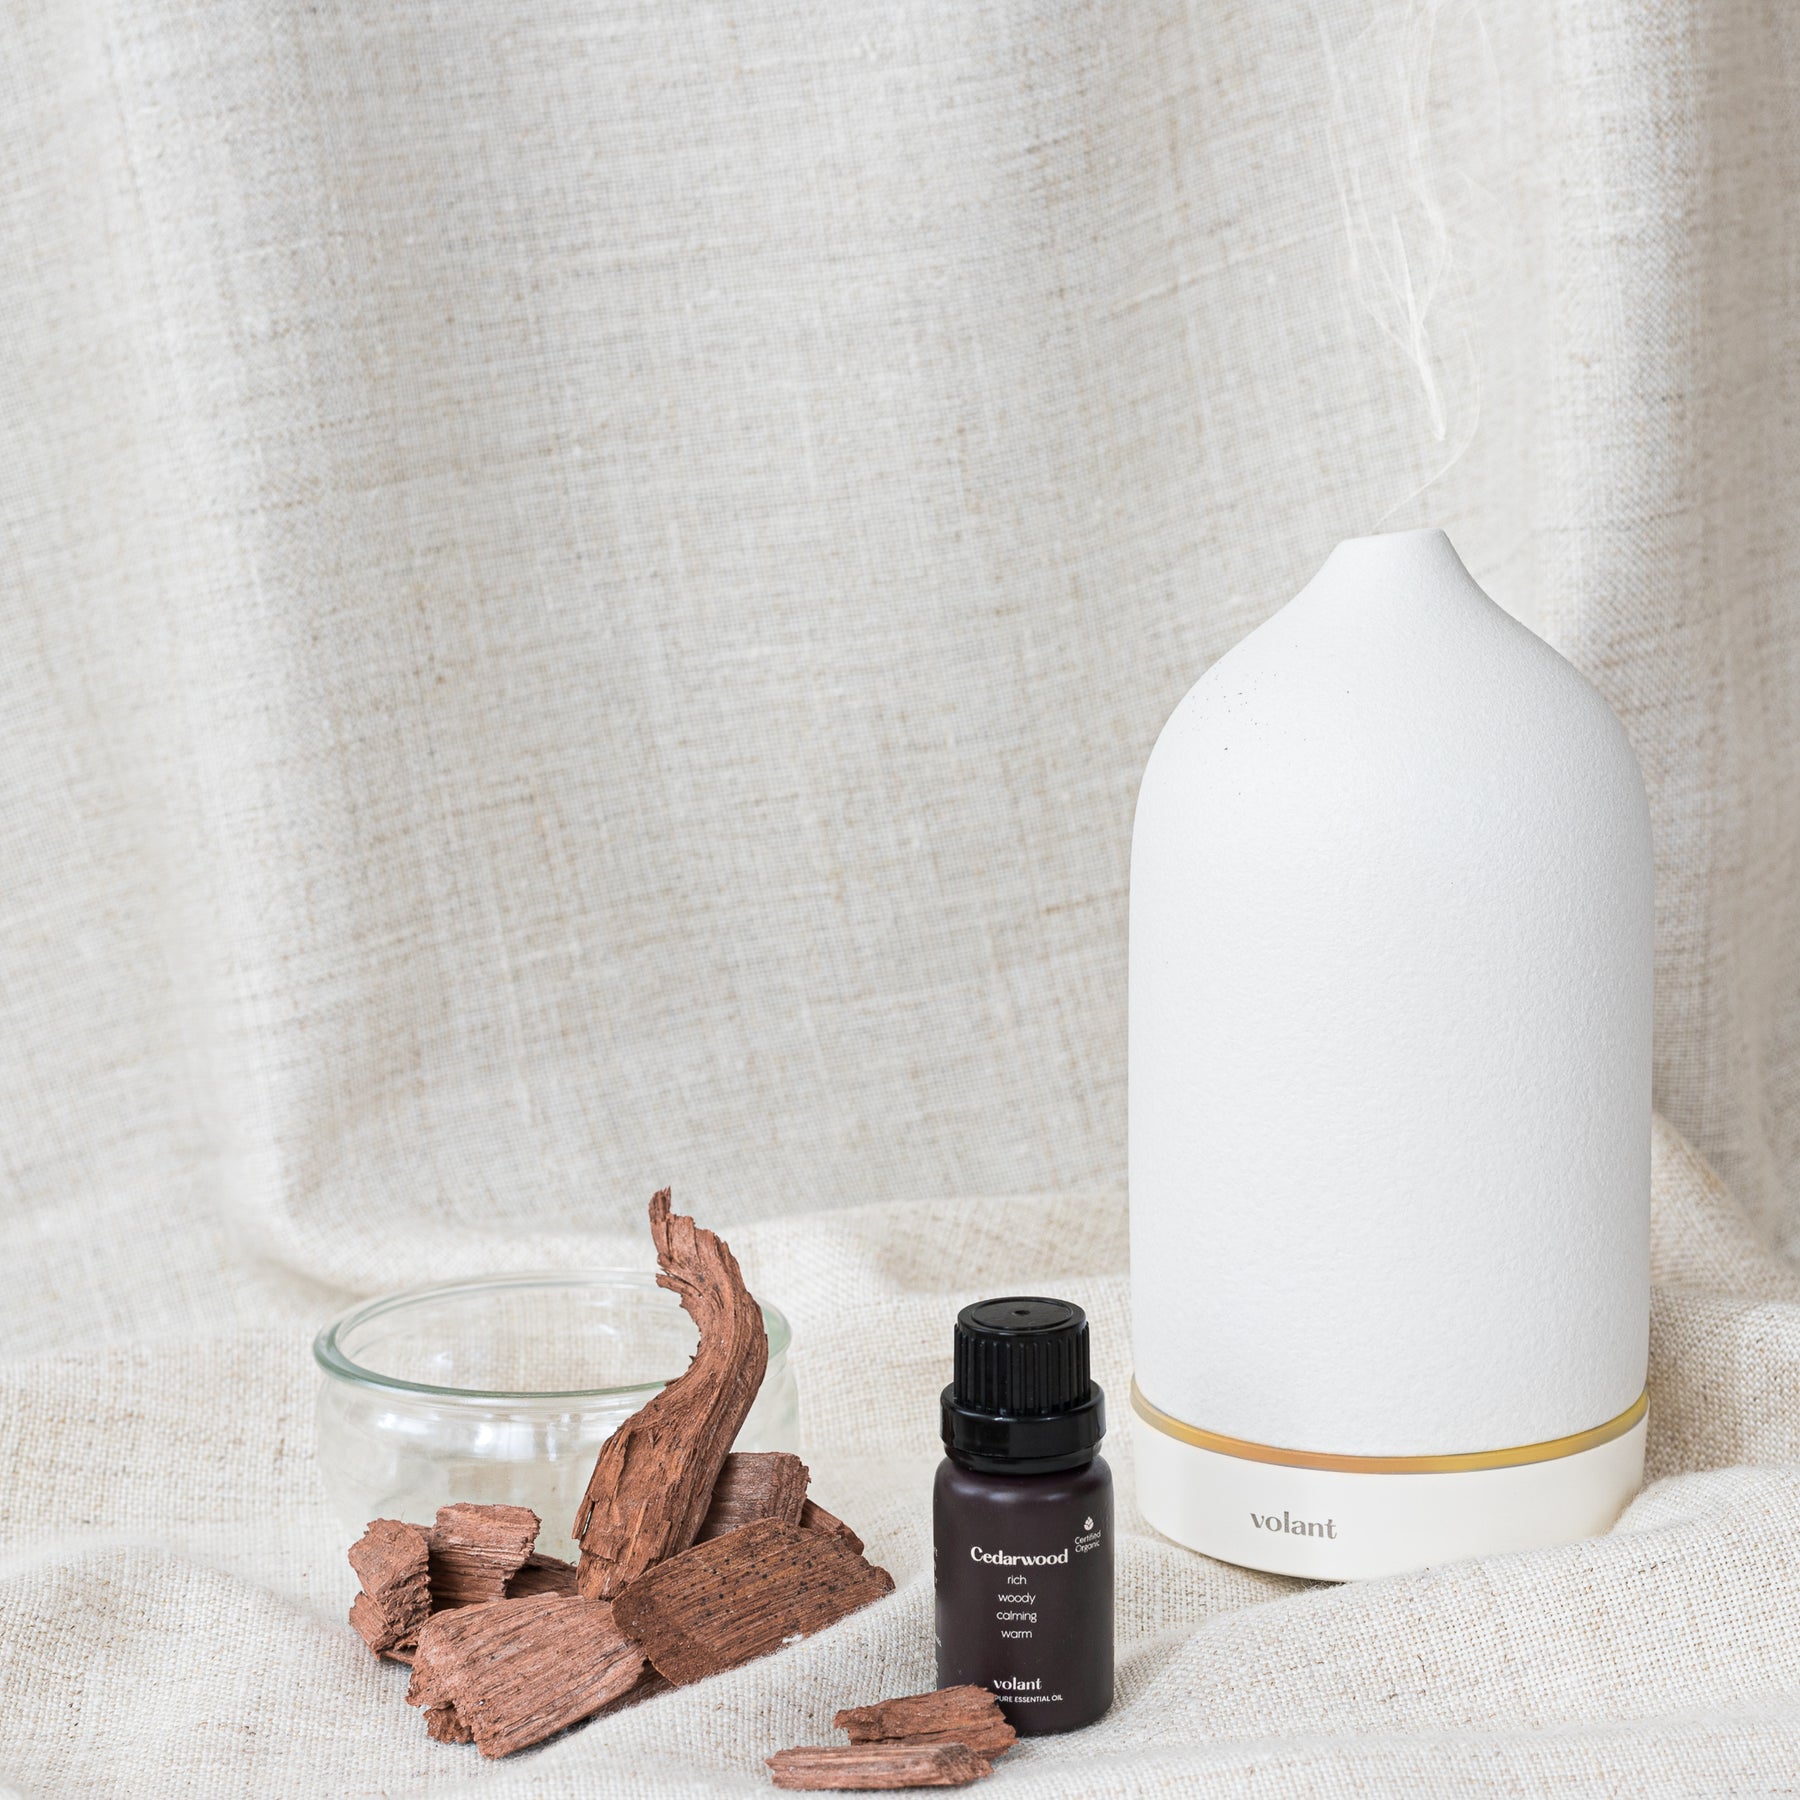 volant white diffuser using organic cedarwood essential oil for home scenting and relaxation